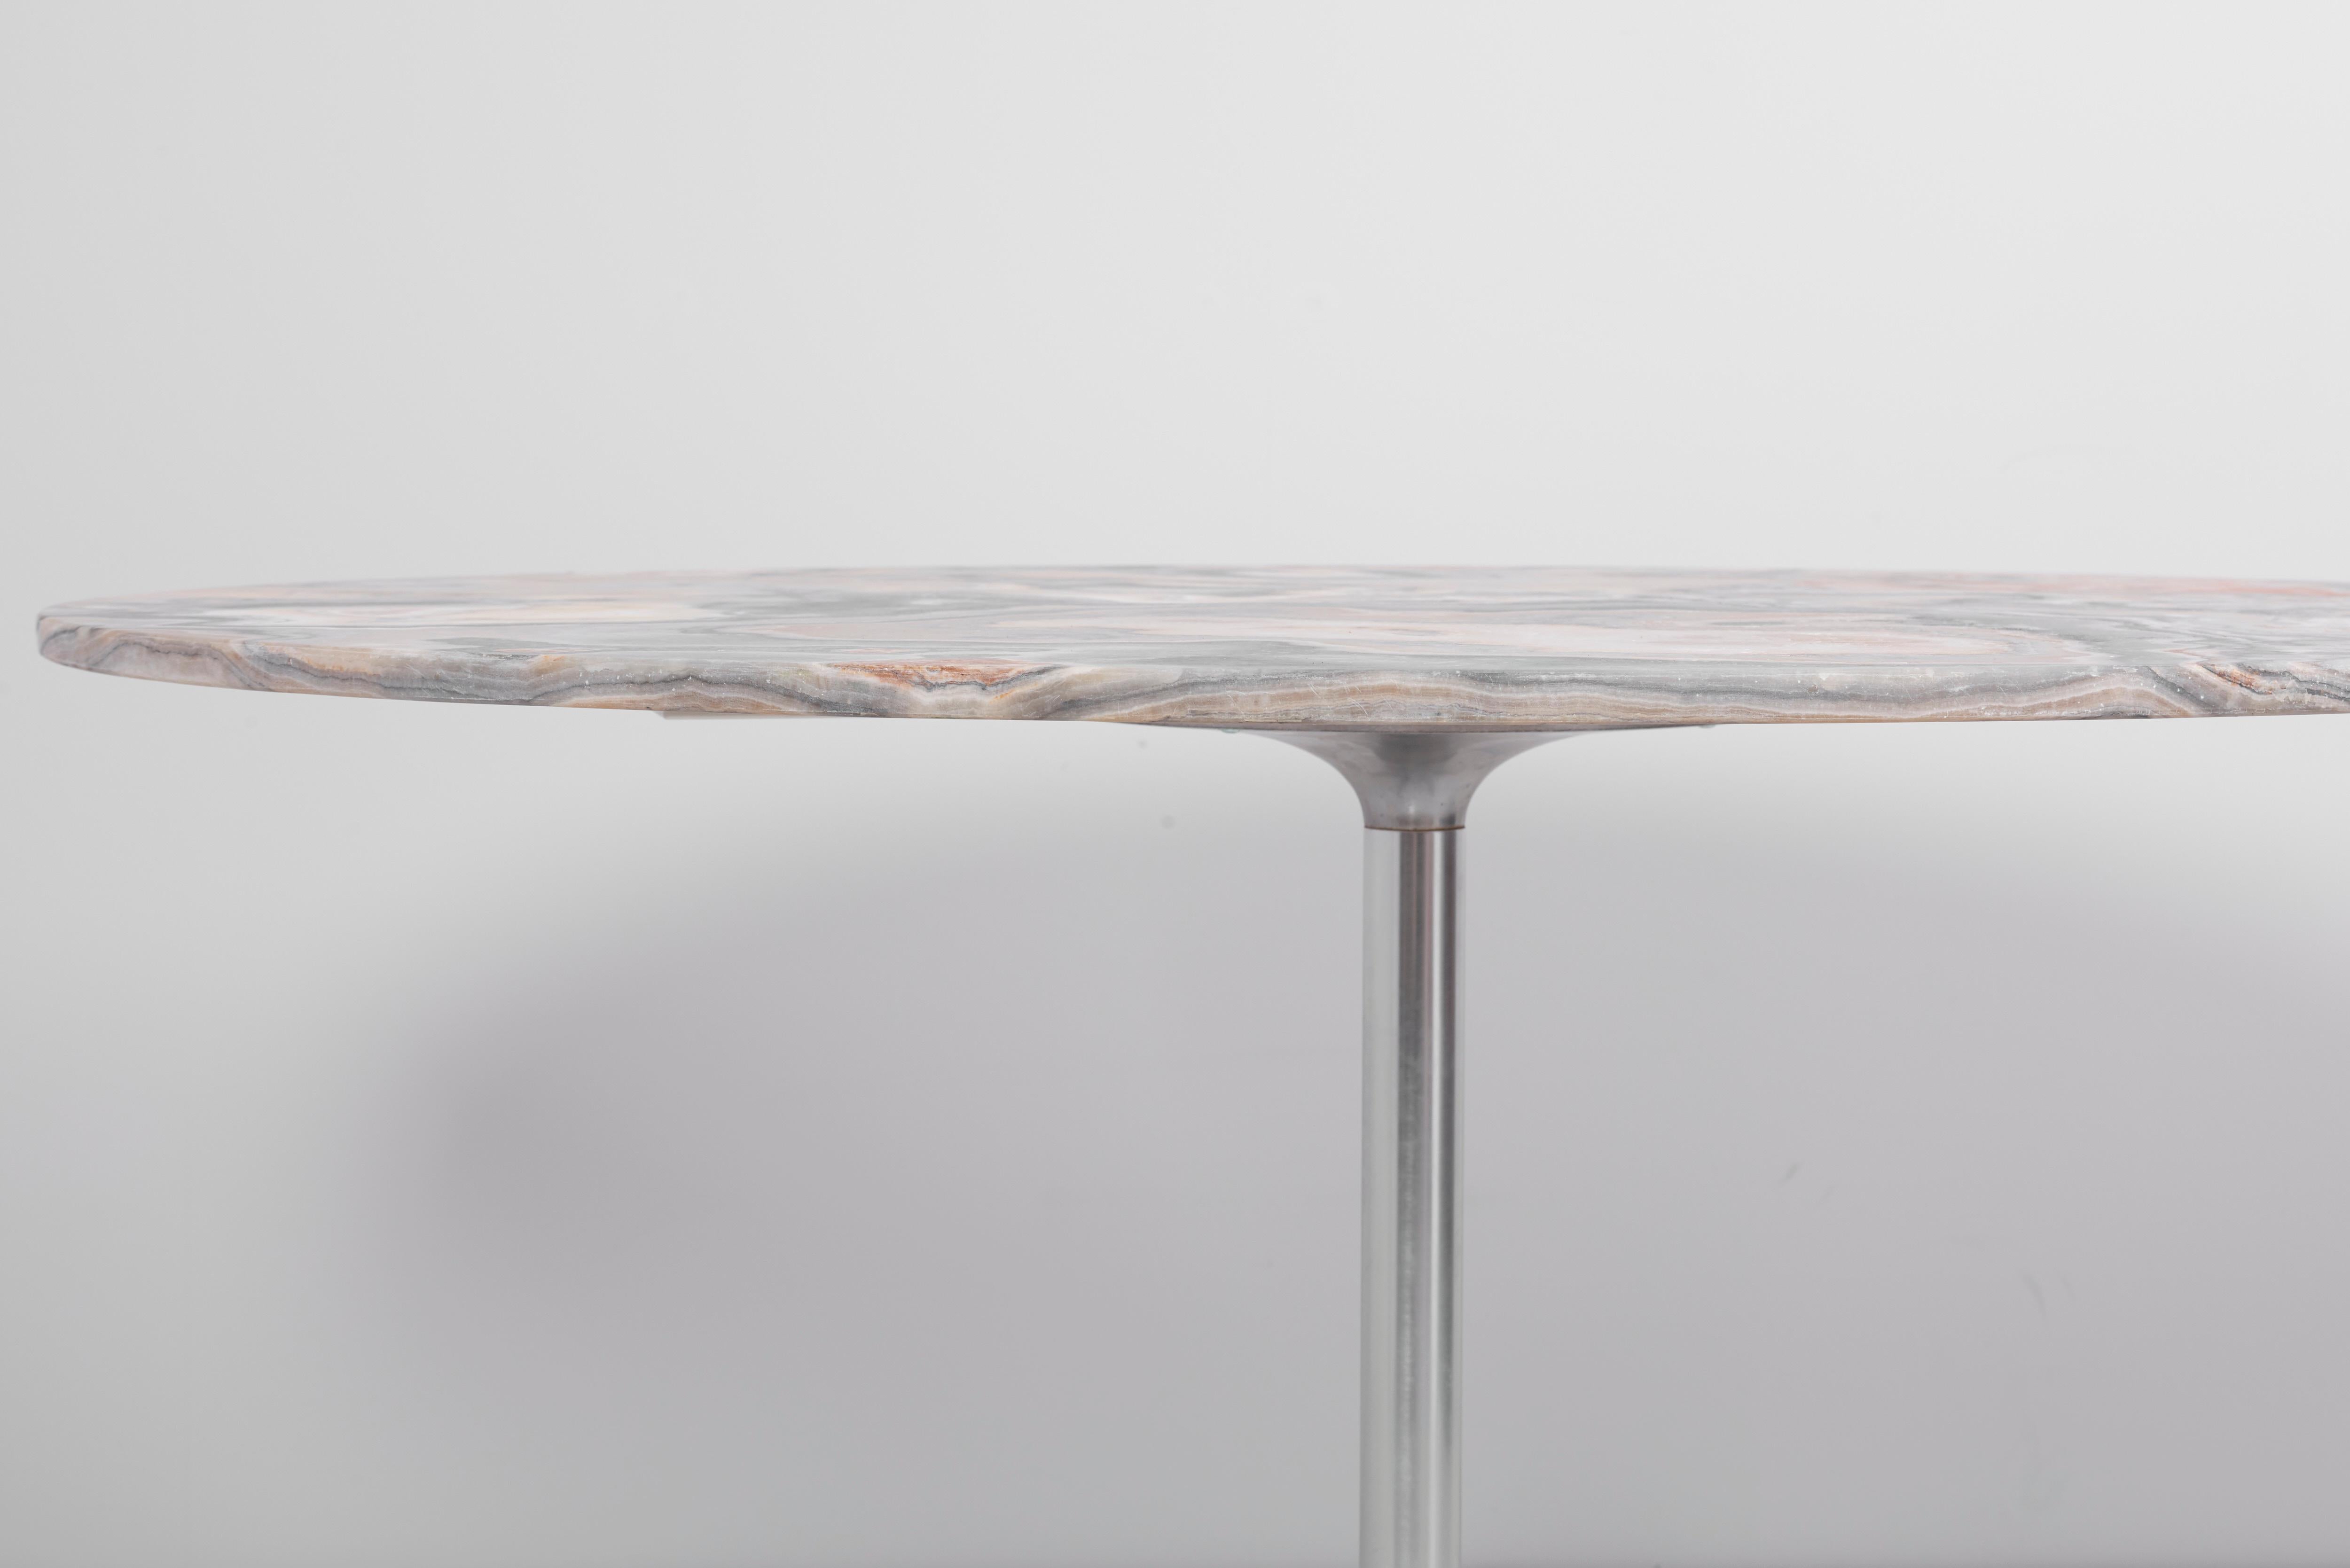 Aluminum Round Marble Dining Table by Horst Brüning for Cor, Germany - 1970s